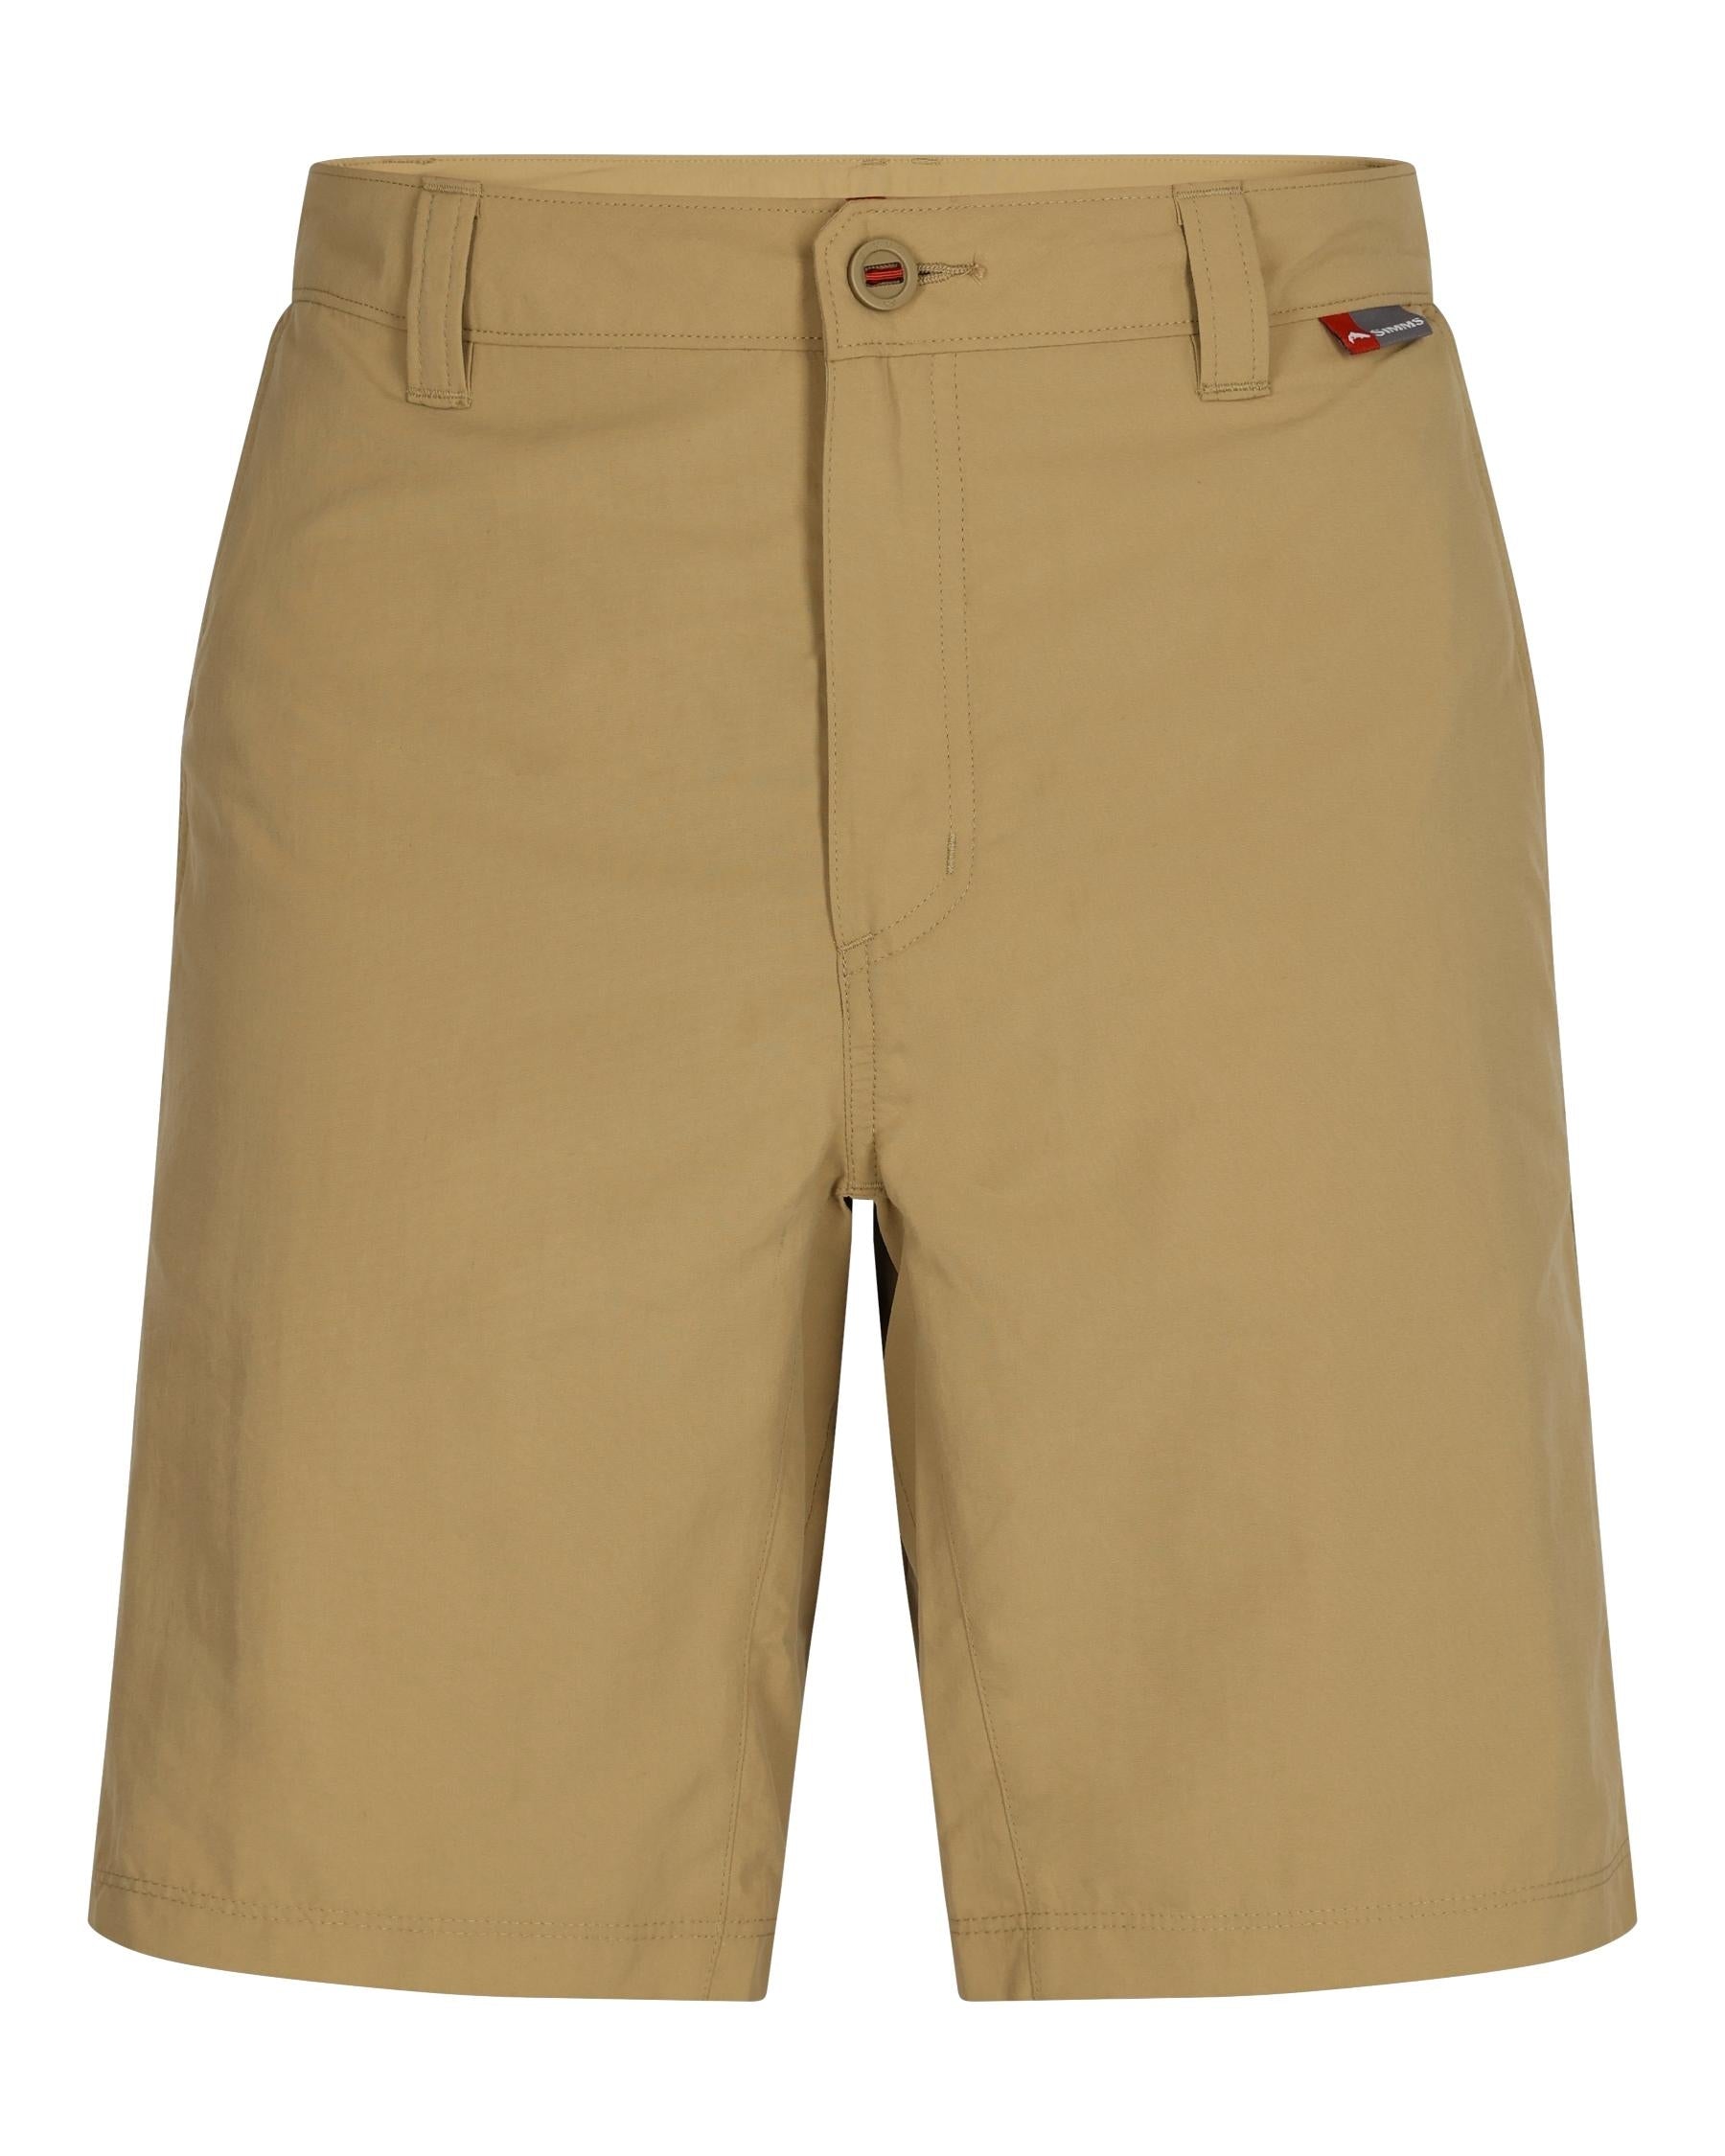 M's Superlight Shorts  Simms Fishing Products